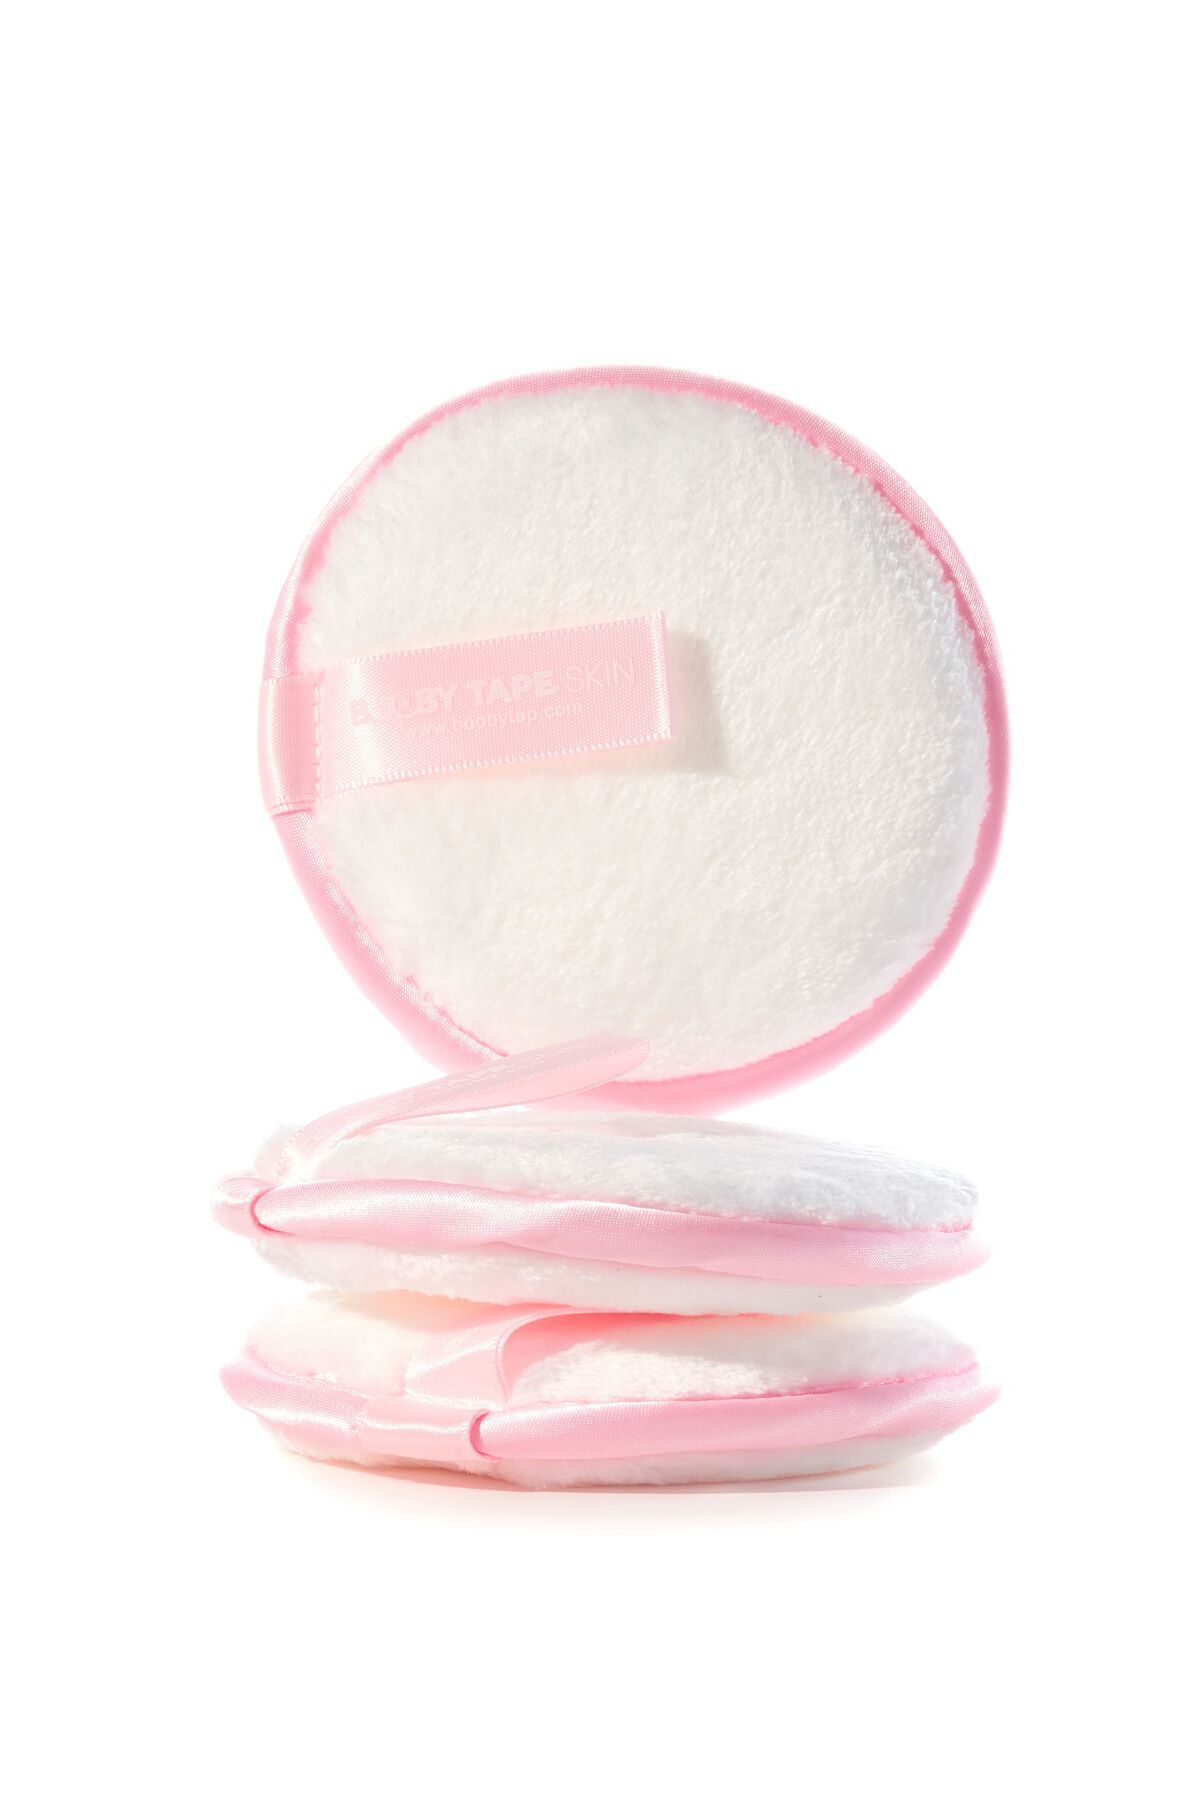 Dynamite BOOBY TAPE | Makeup Remover Pads. 2